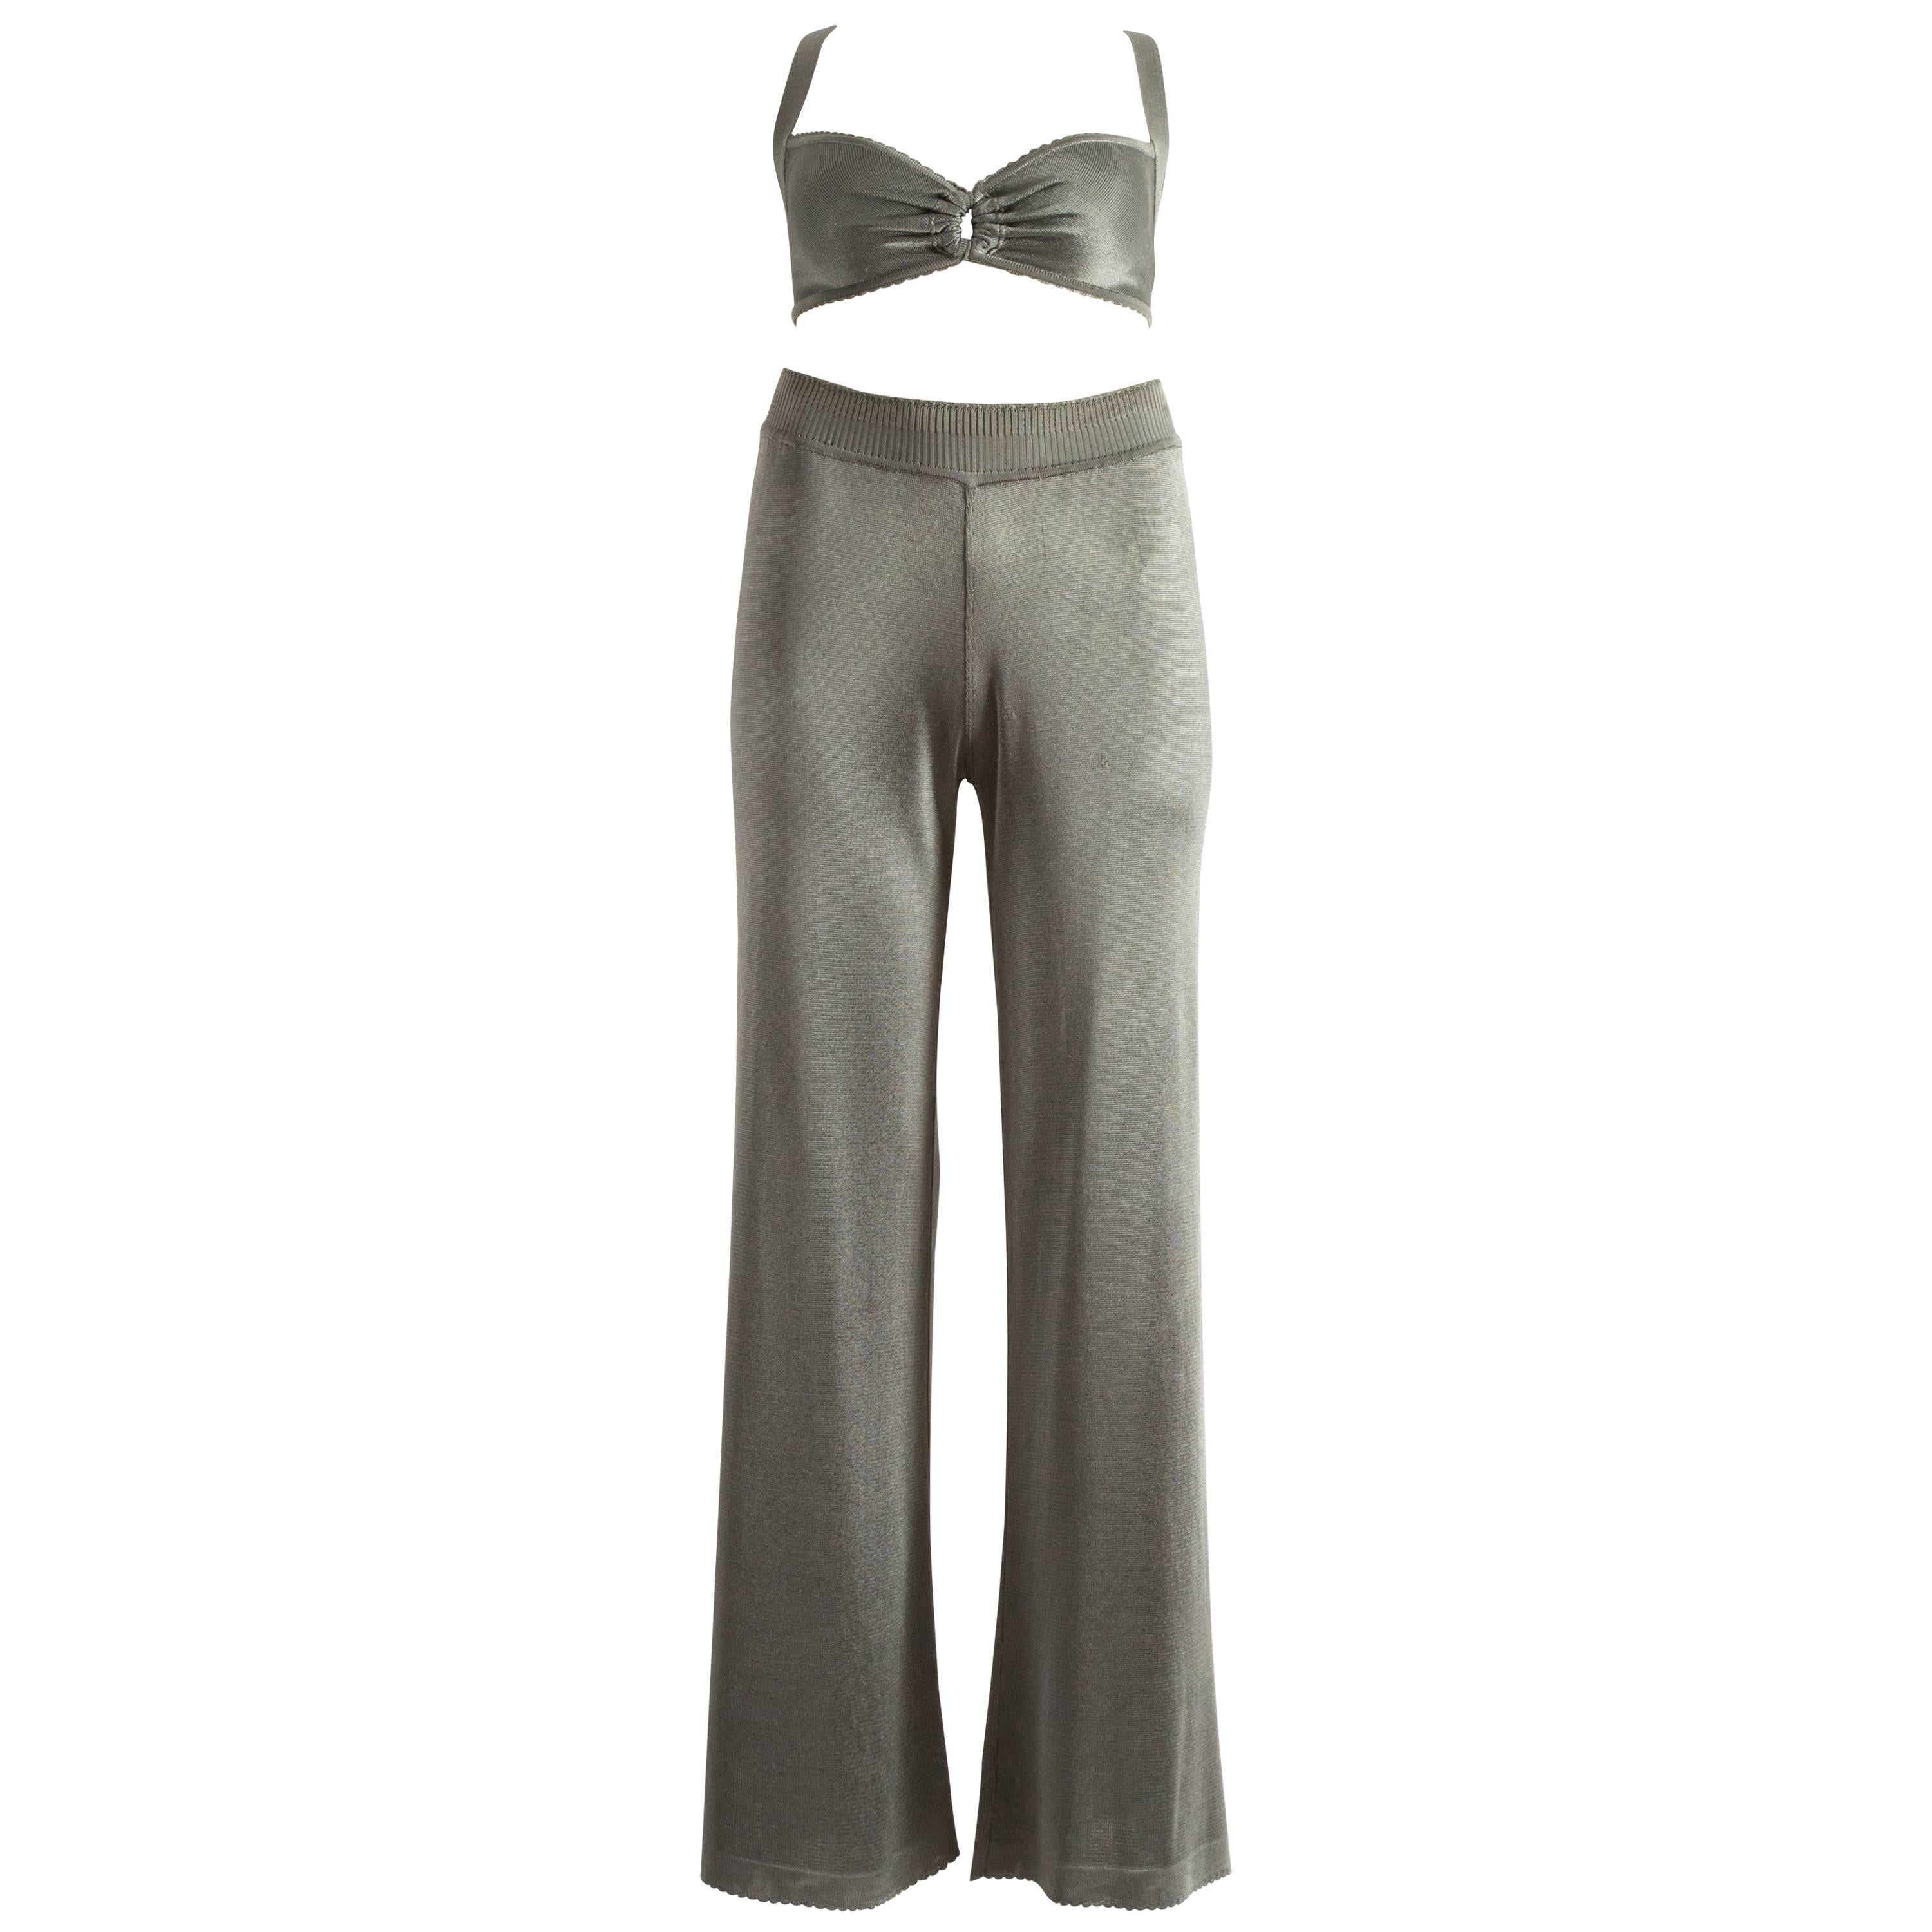 Azzedine Alaia Spring-Summer 1993 grey acetate knitted bra and pants ensemble 